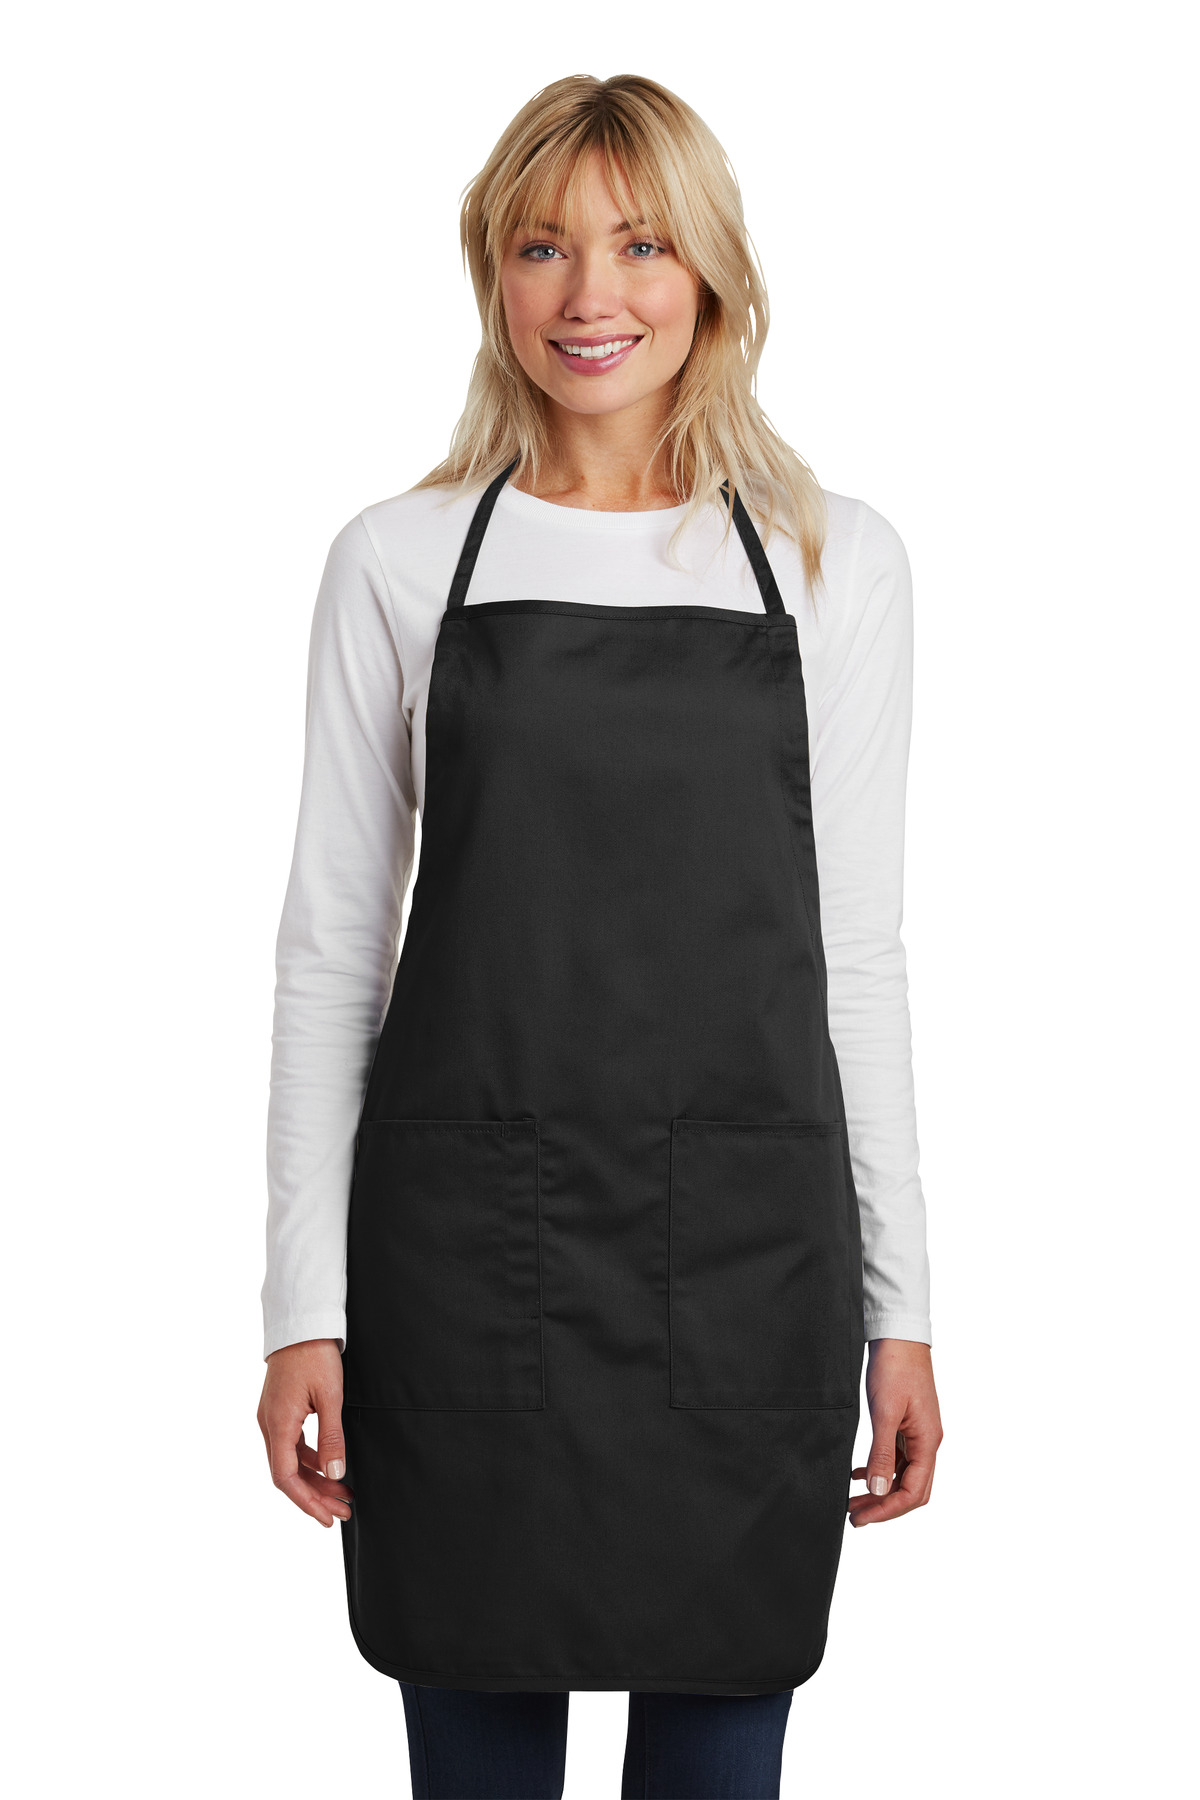 Port Authority Hospitality Accessories & Workwear ® Full-Length Apron.-Port Authority